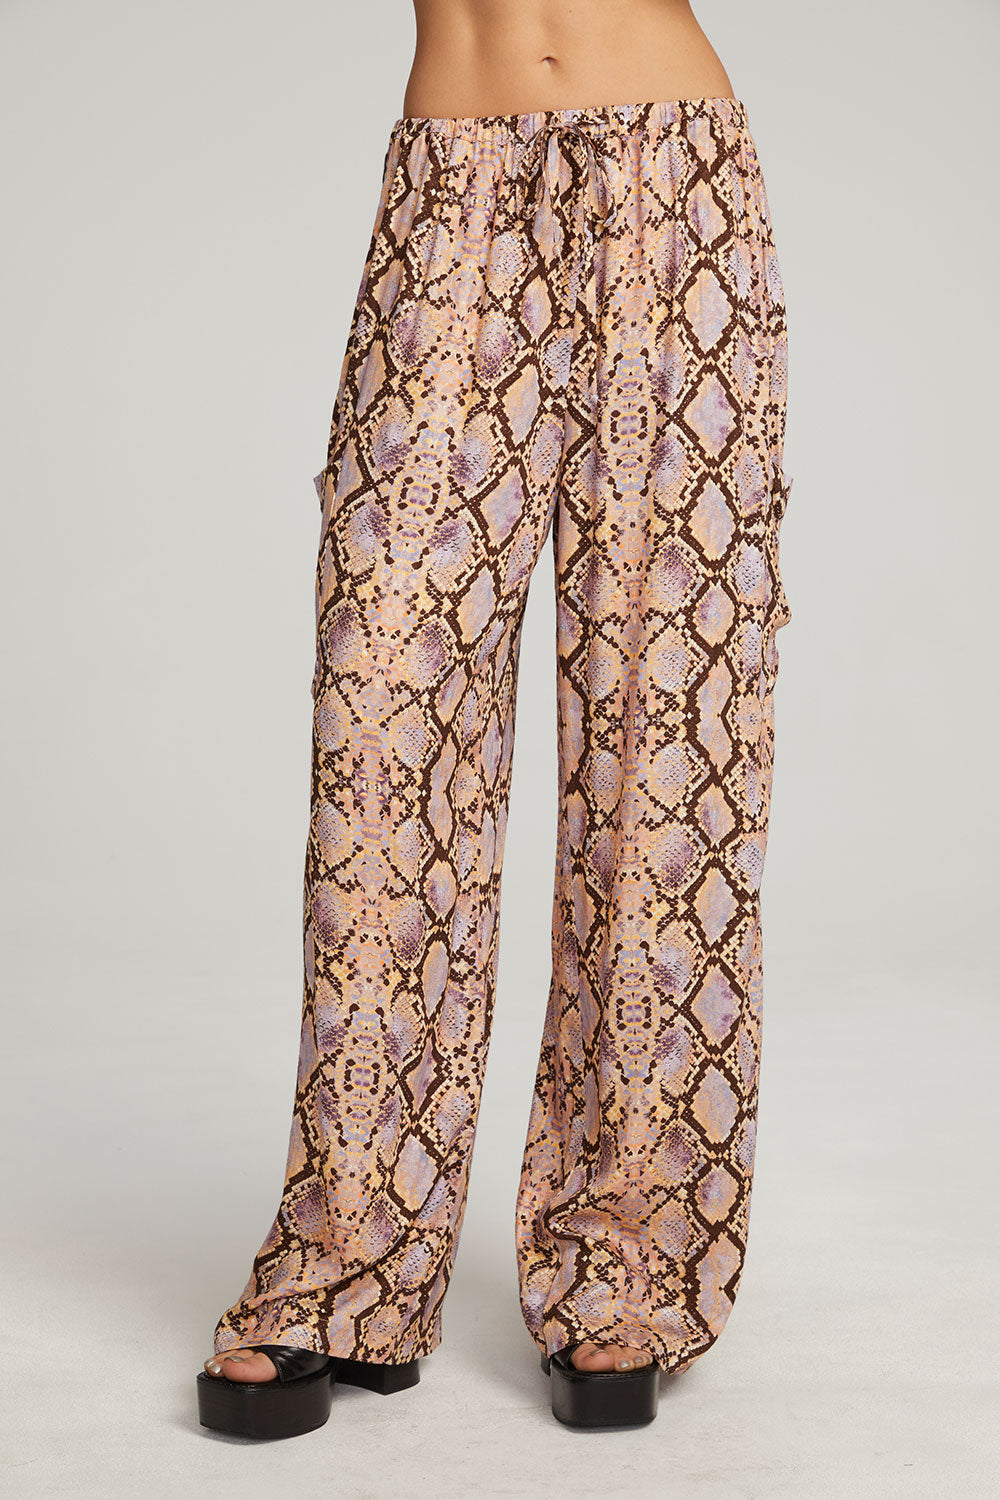 Buy Victoria's Secret Snake Animal Print Ruched Legging from Next Luxembourg